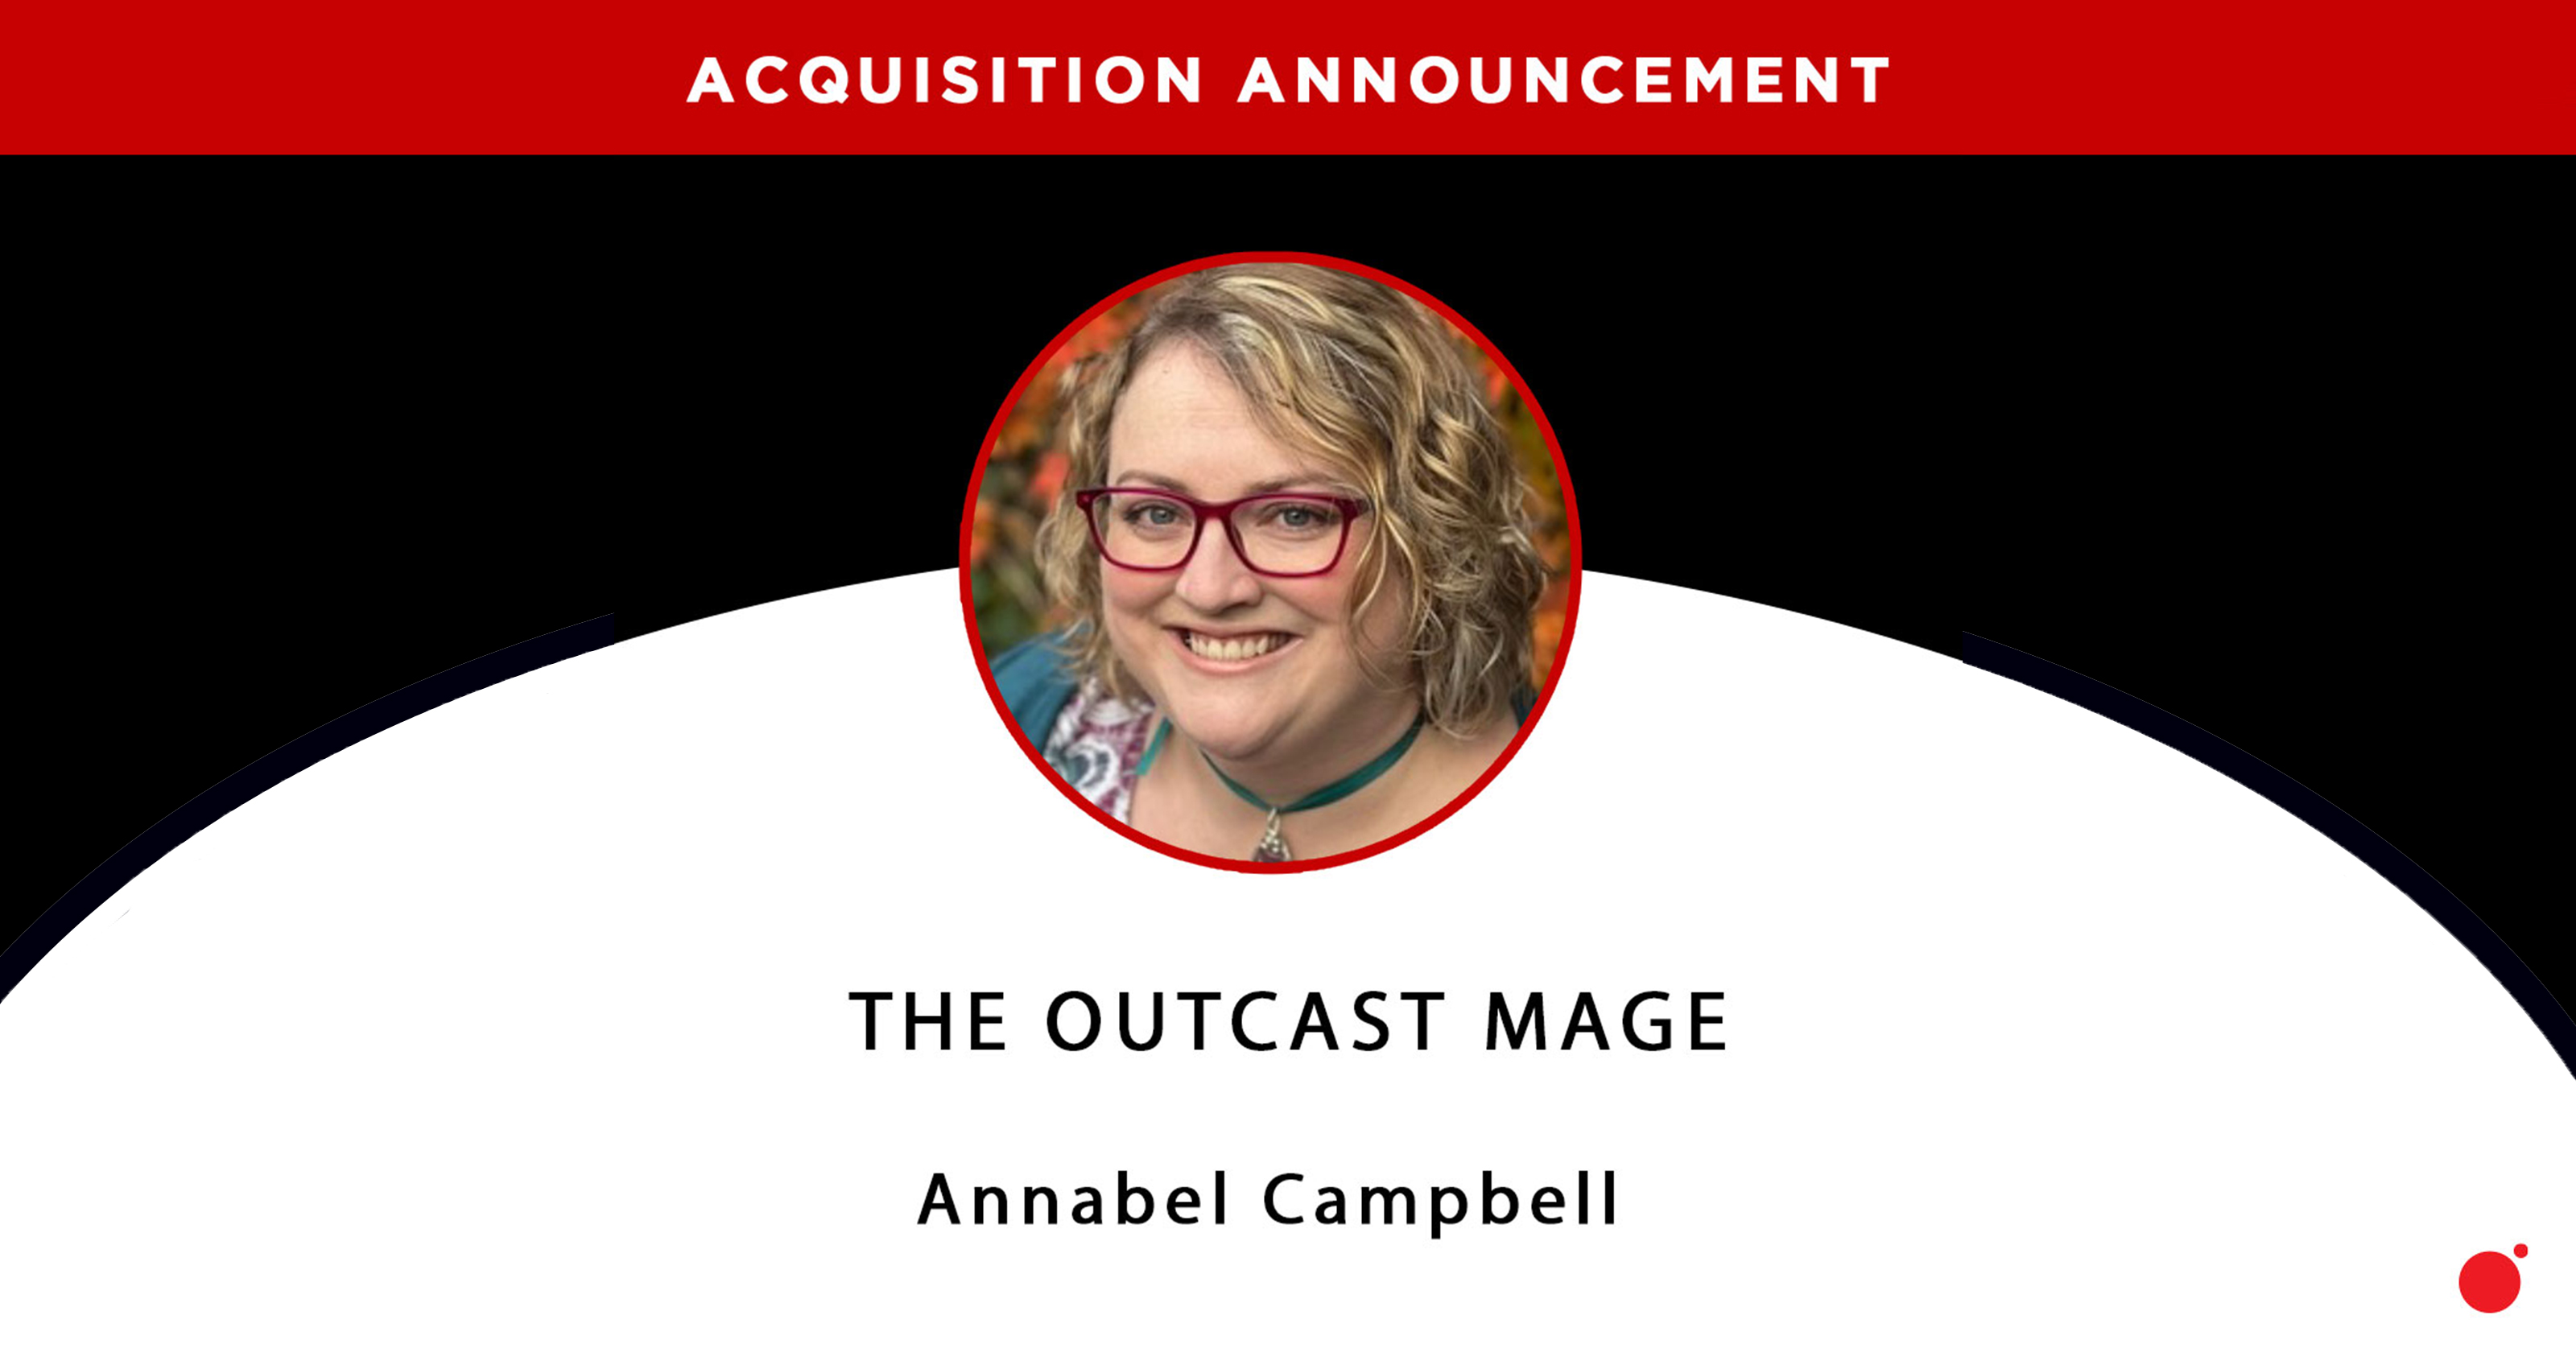 The Outcast Mage by Annabel Campbell